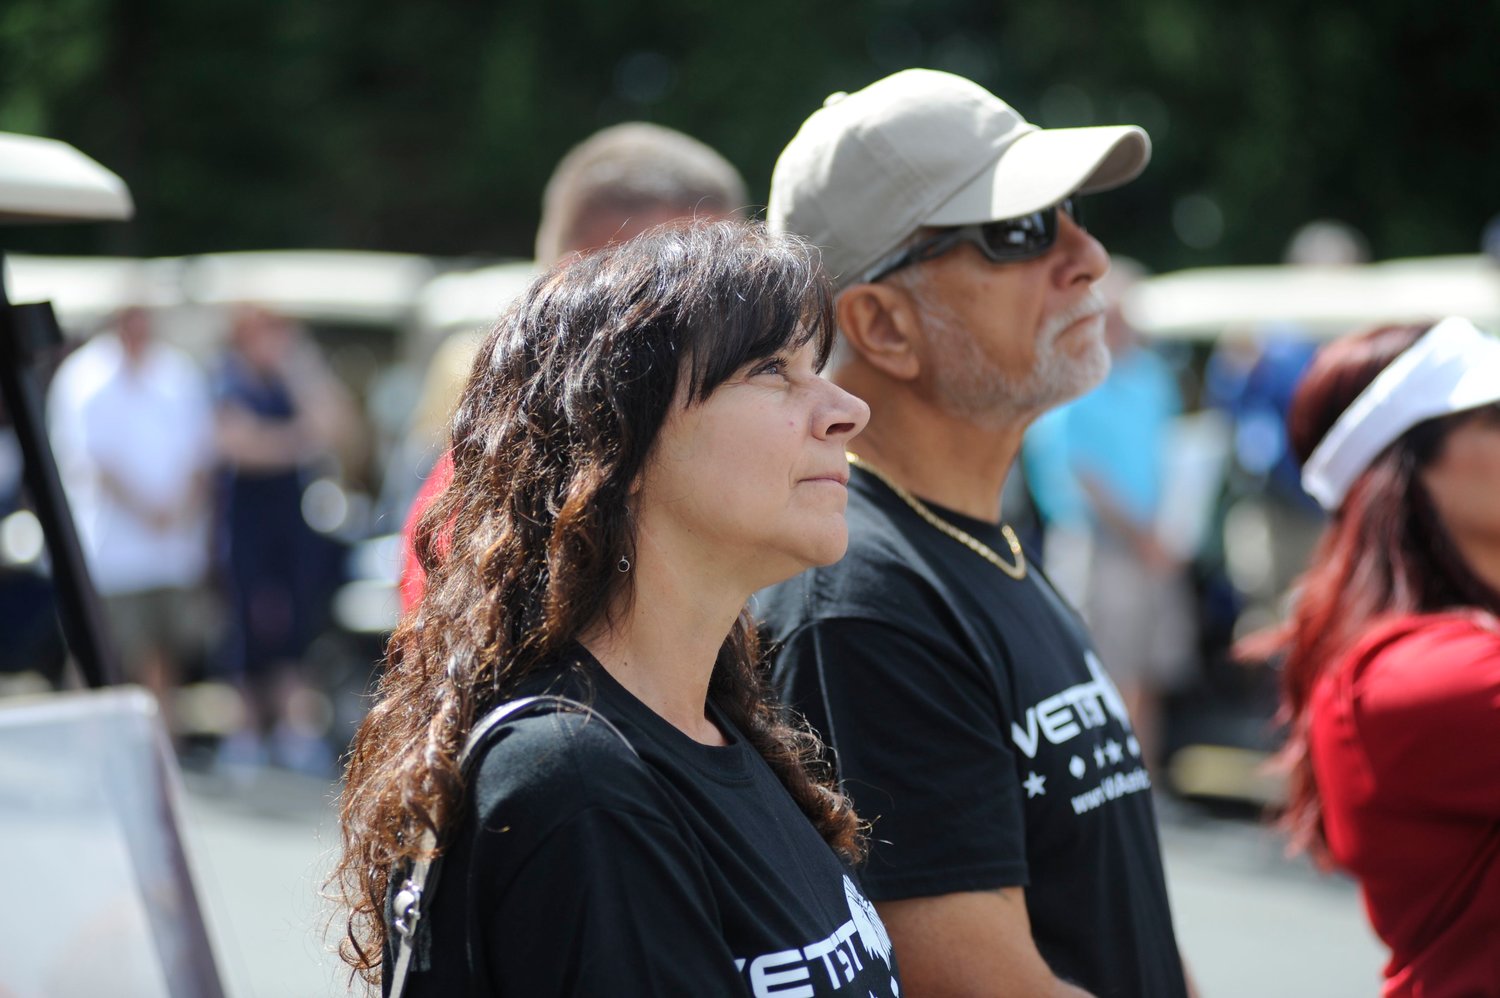 Patriots at attention. Pam and Rich Catero of Milford, PA are staunch supports of VetStock’s mission to combat suicide among the nation’s military.